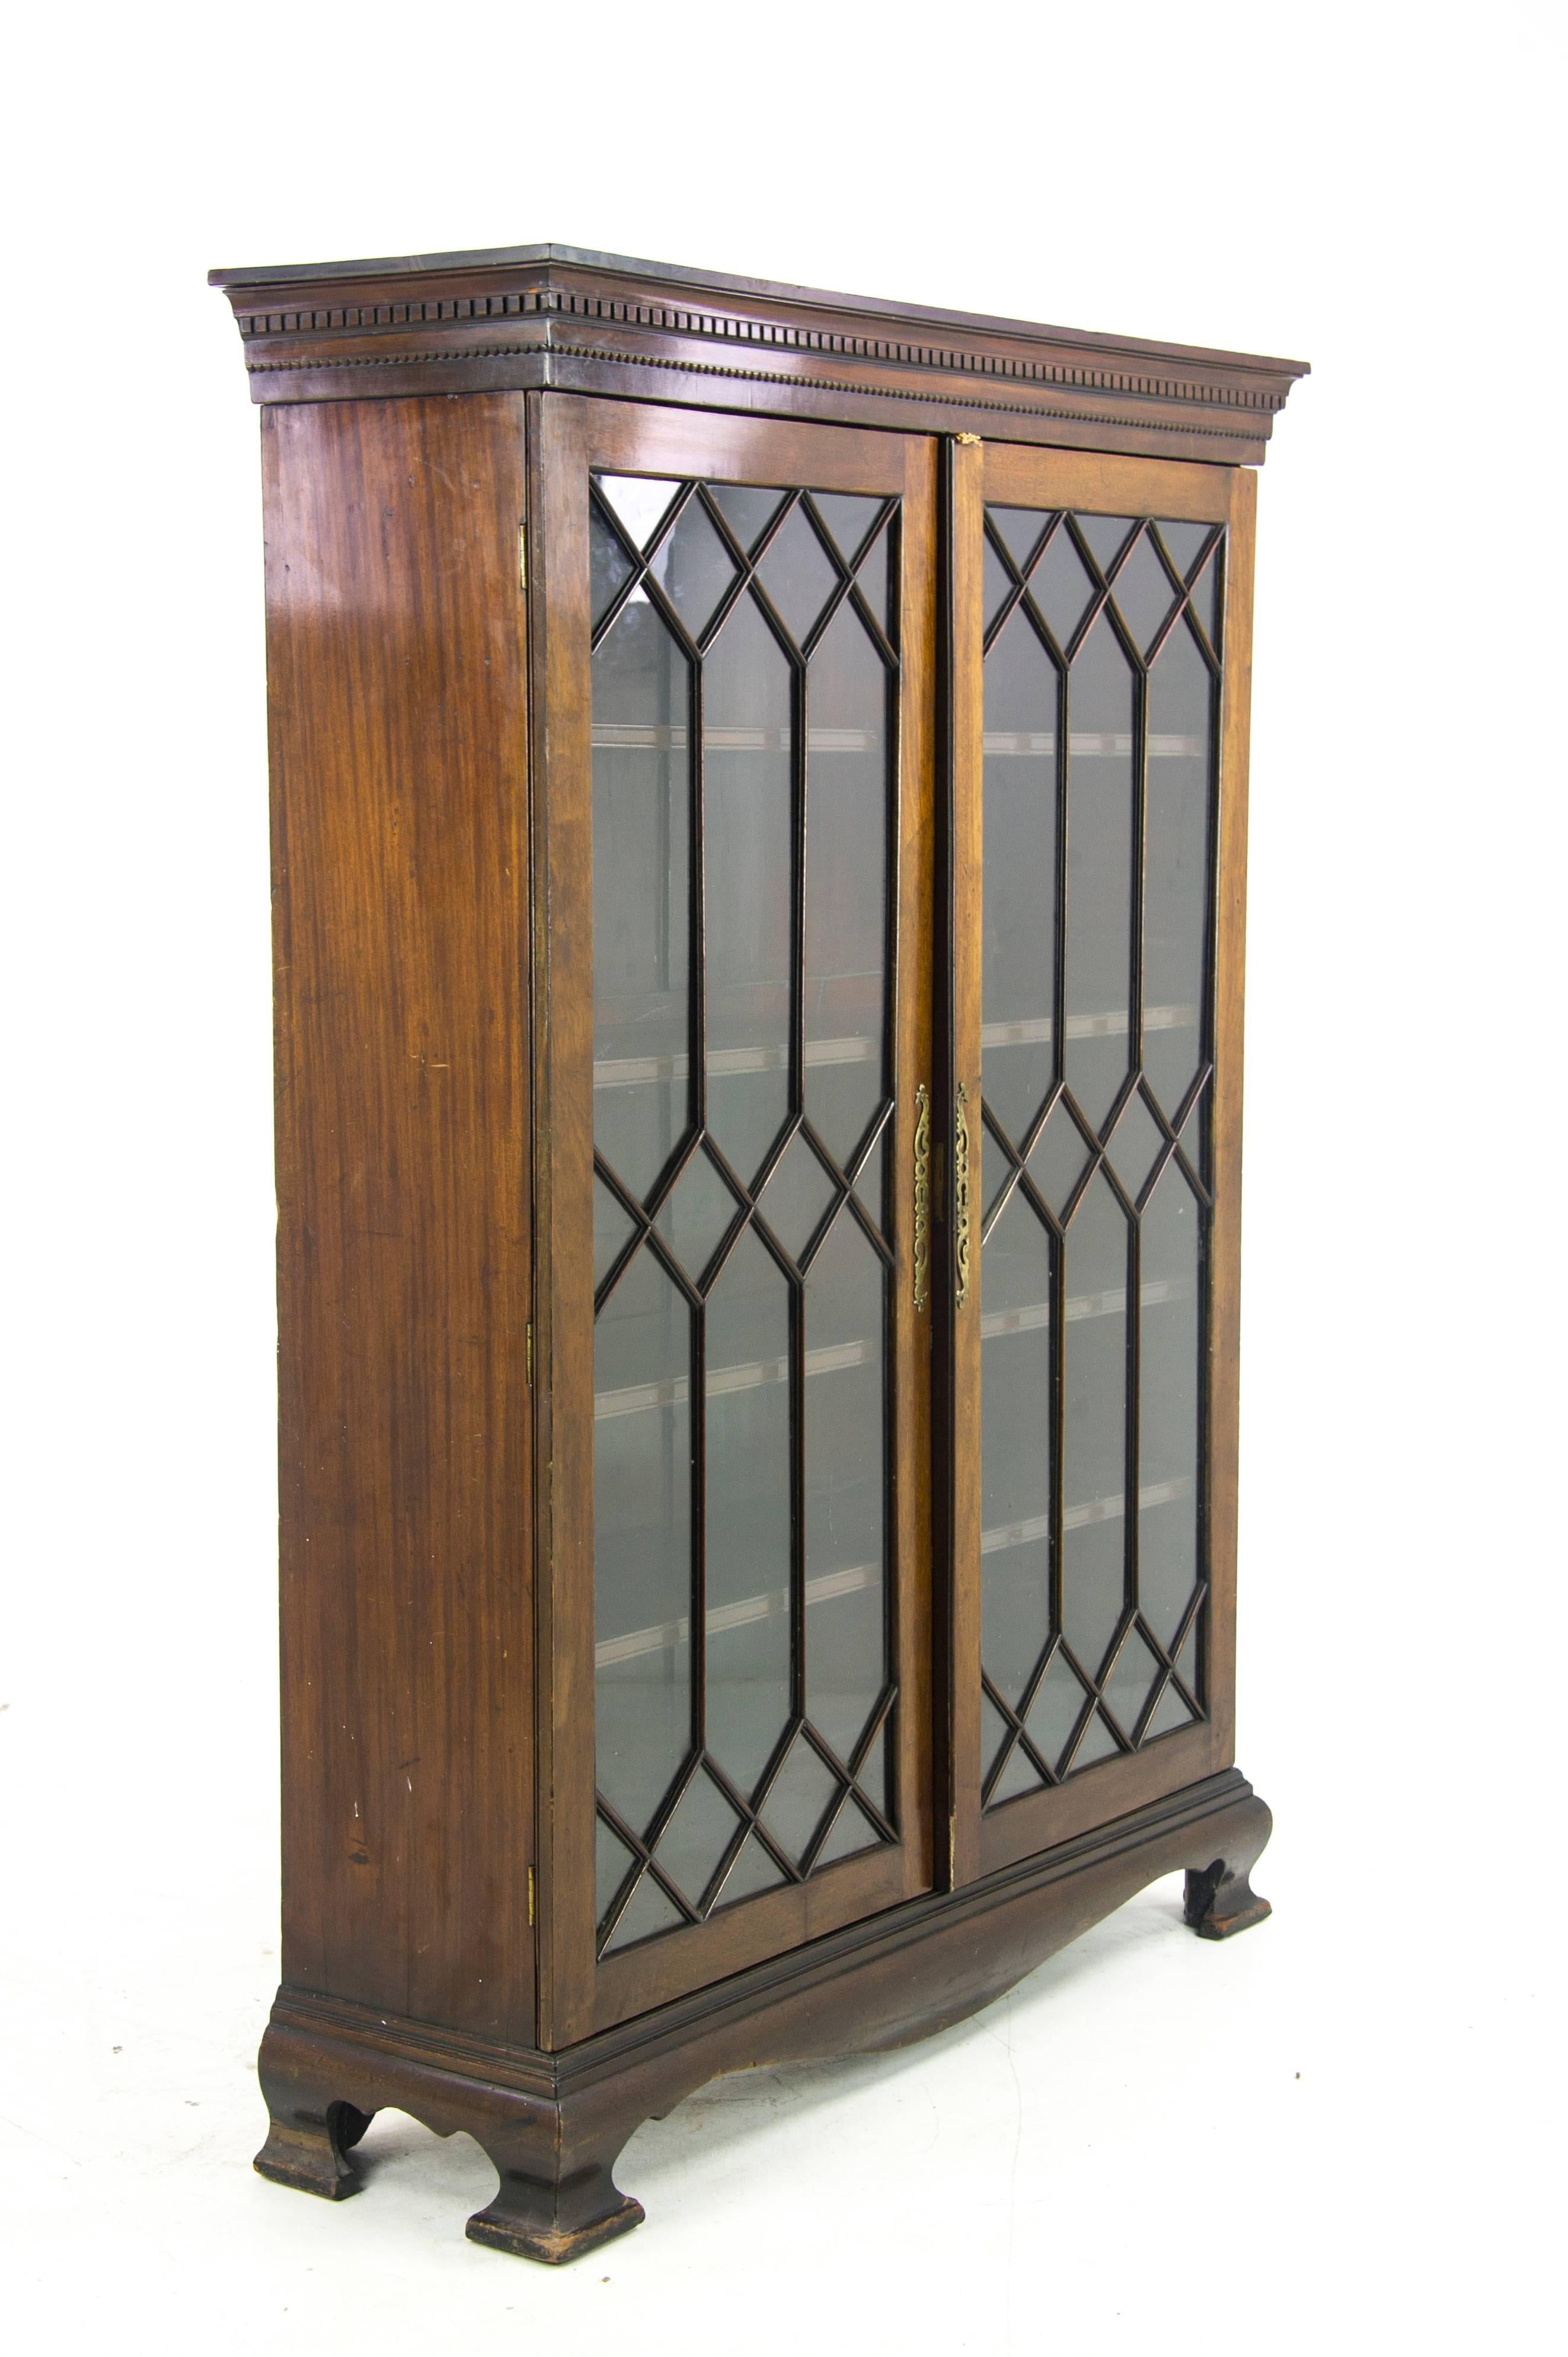 Hand-Crafted Walnut Bookcase, Antique Display Cabinet, Astragal Glass, Scotland, 1890